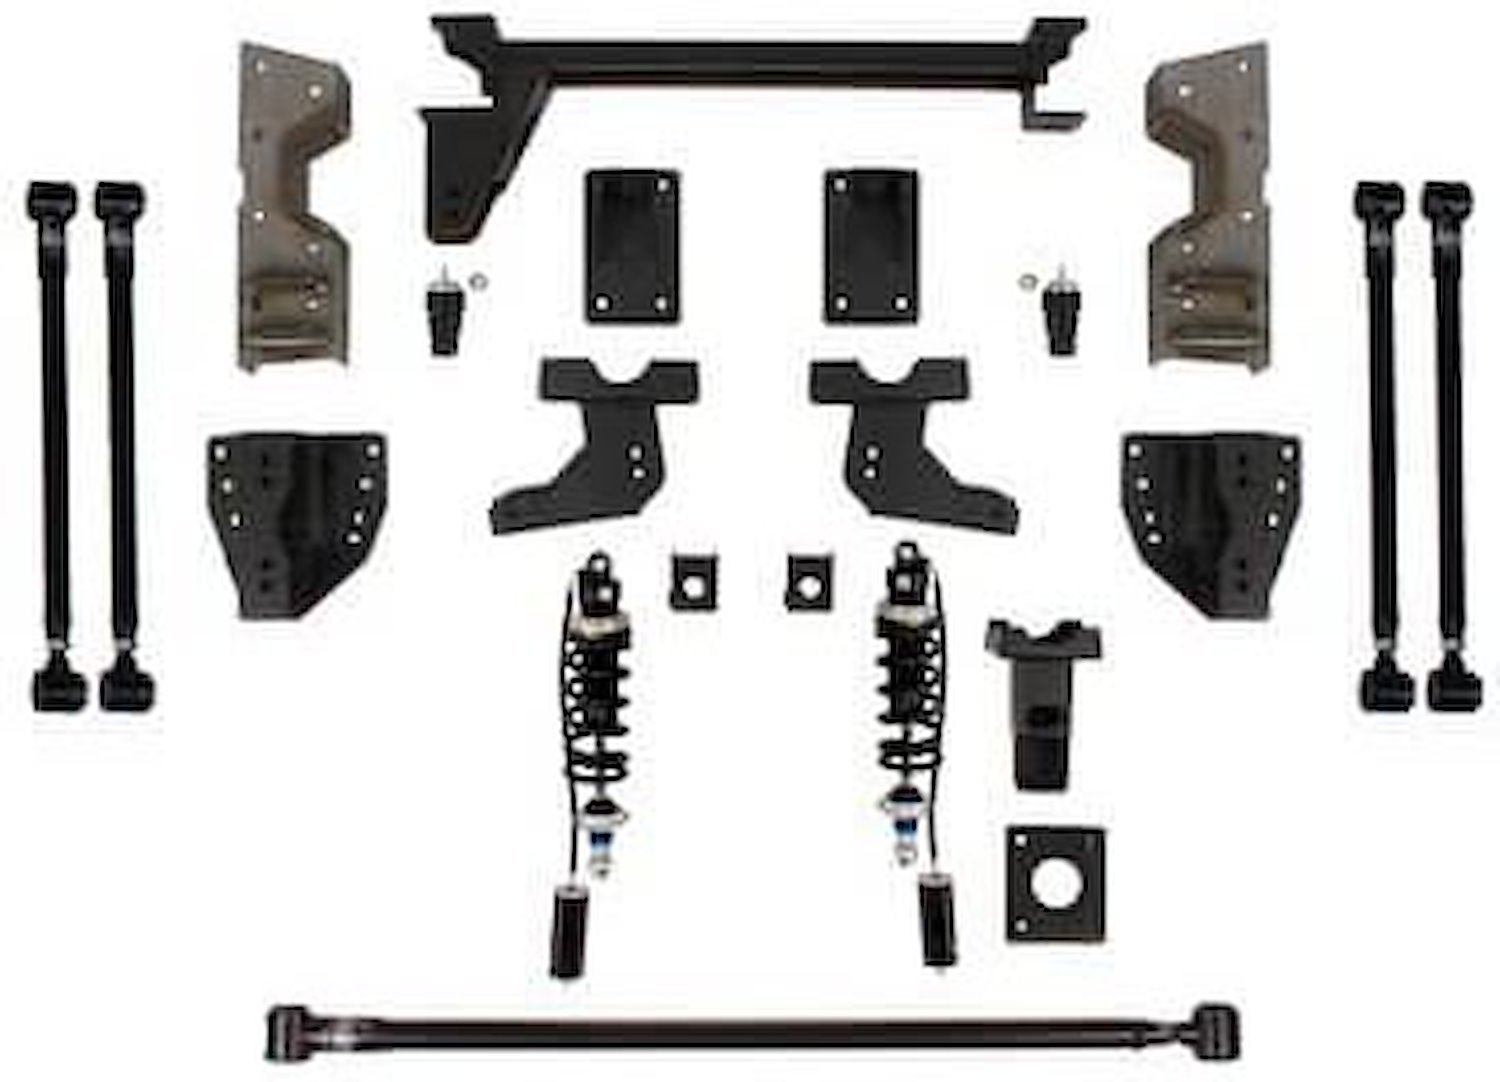 QUADRALink Rear Suspension Kit 1973-87 GM C10/C15, Double-Adjustable Shocks, Weld-in Brackets [Ride Height: 5-7.500 in. Lowered]